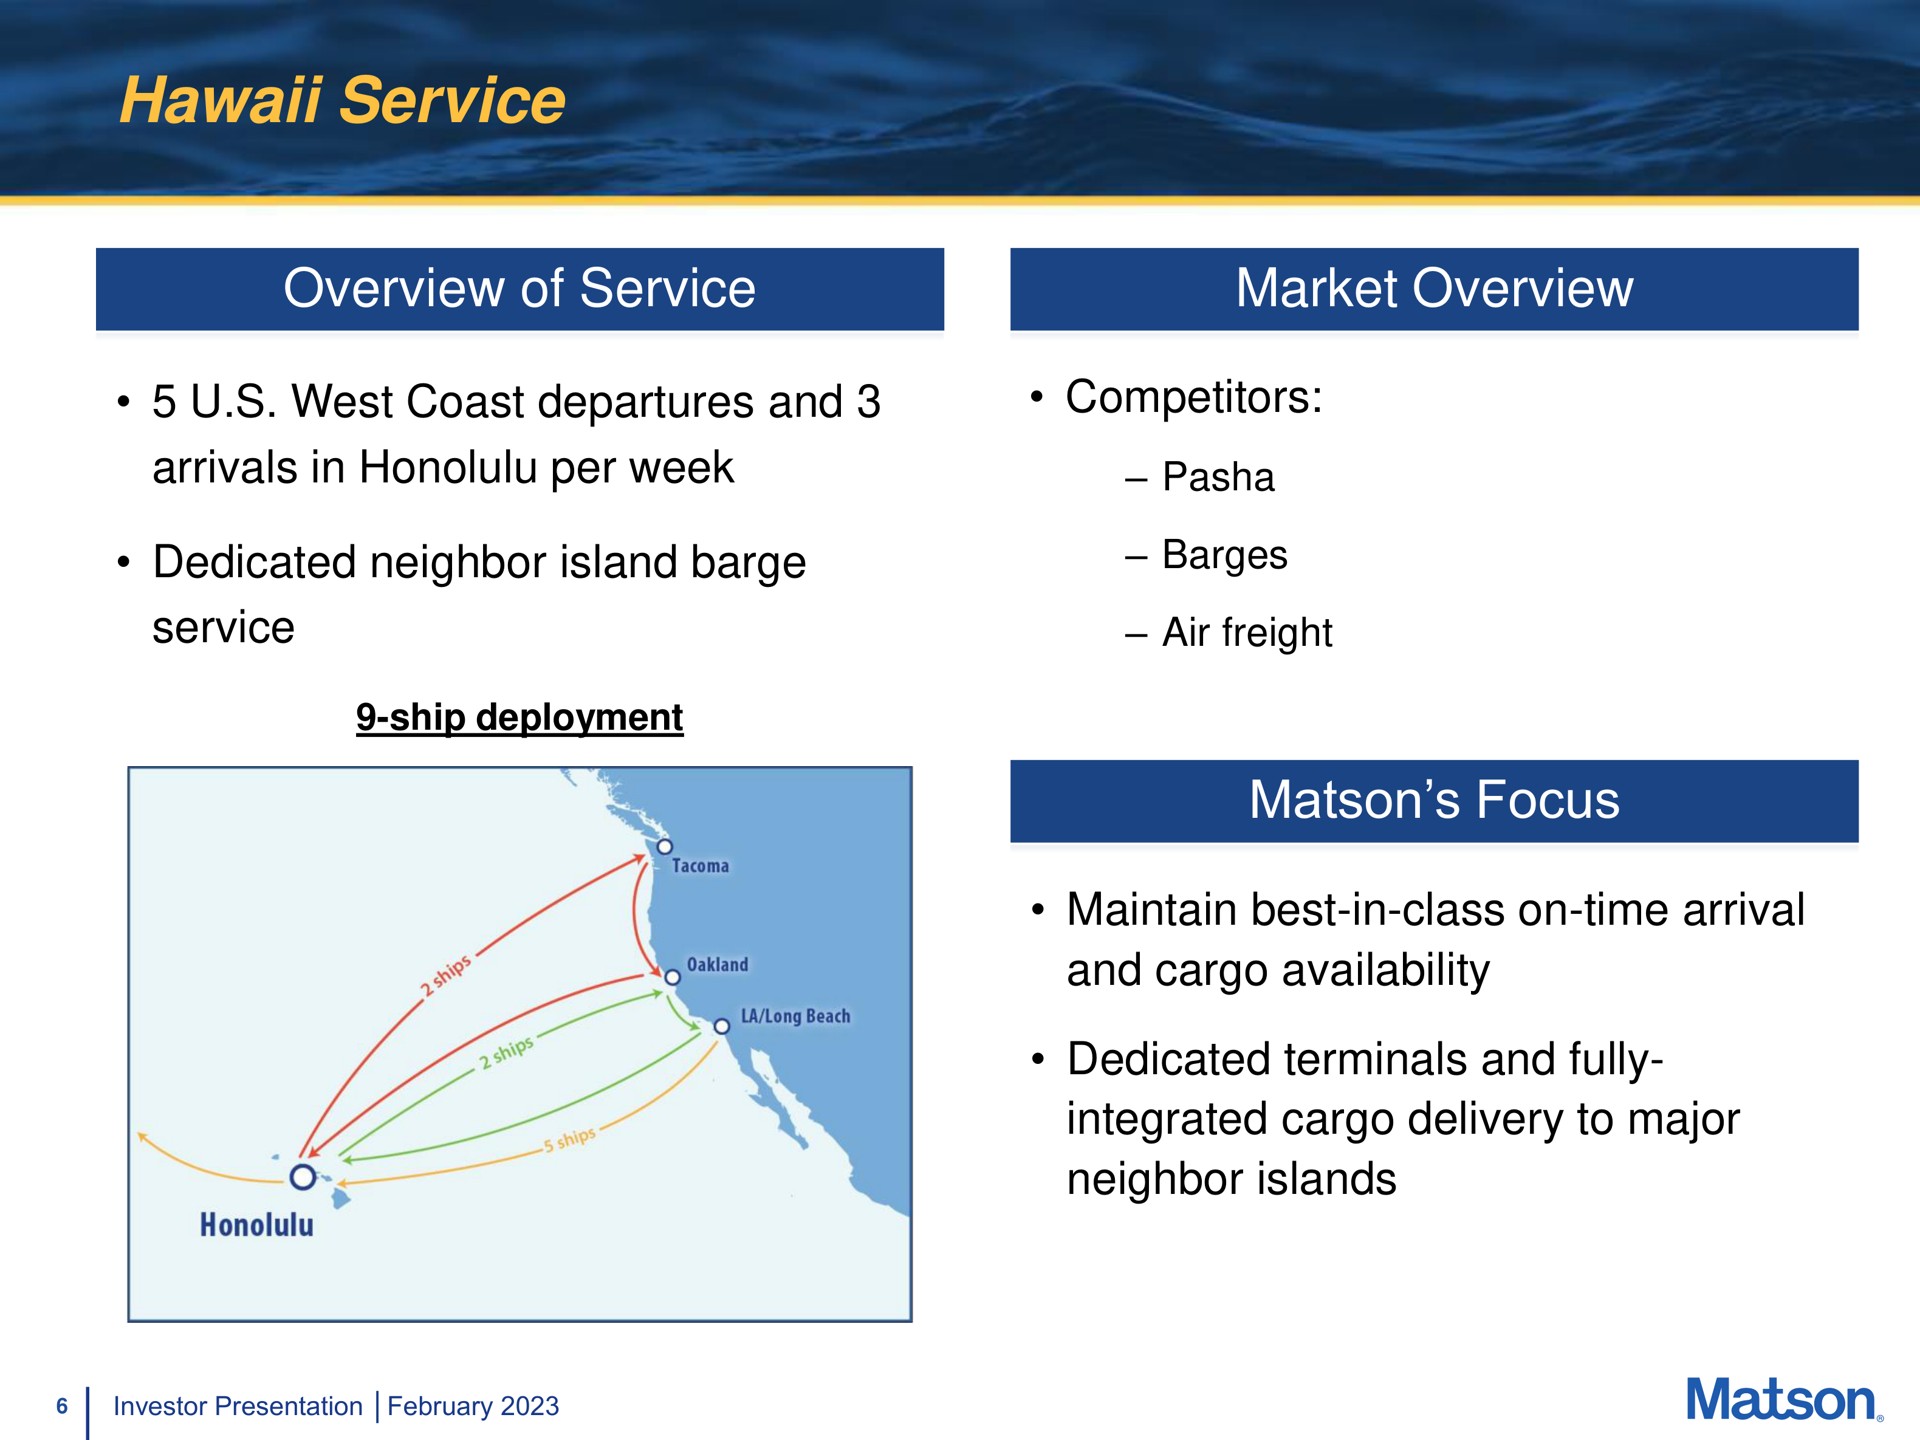 service overview of service market overview west coast departures and competitors arrivals in per week dedicated neighbor island barge service focus maintain best in class on time arrival and cargo availability dedicated terminals and fully integrated cargo delivery to major neighbor islands pasha barges air freight | Matson